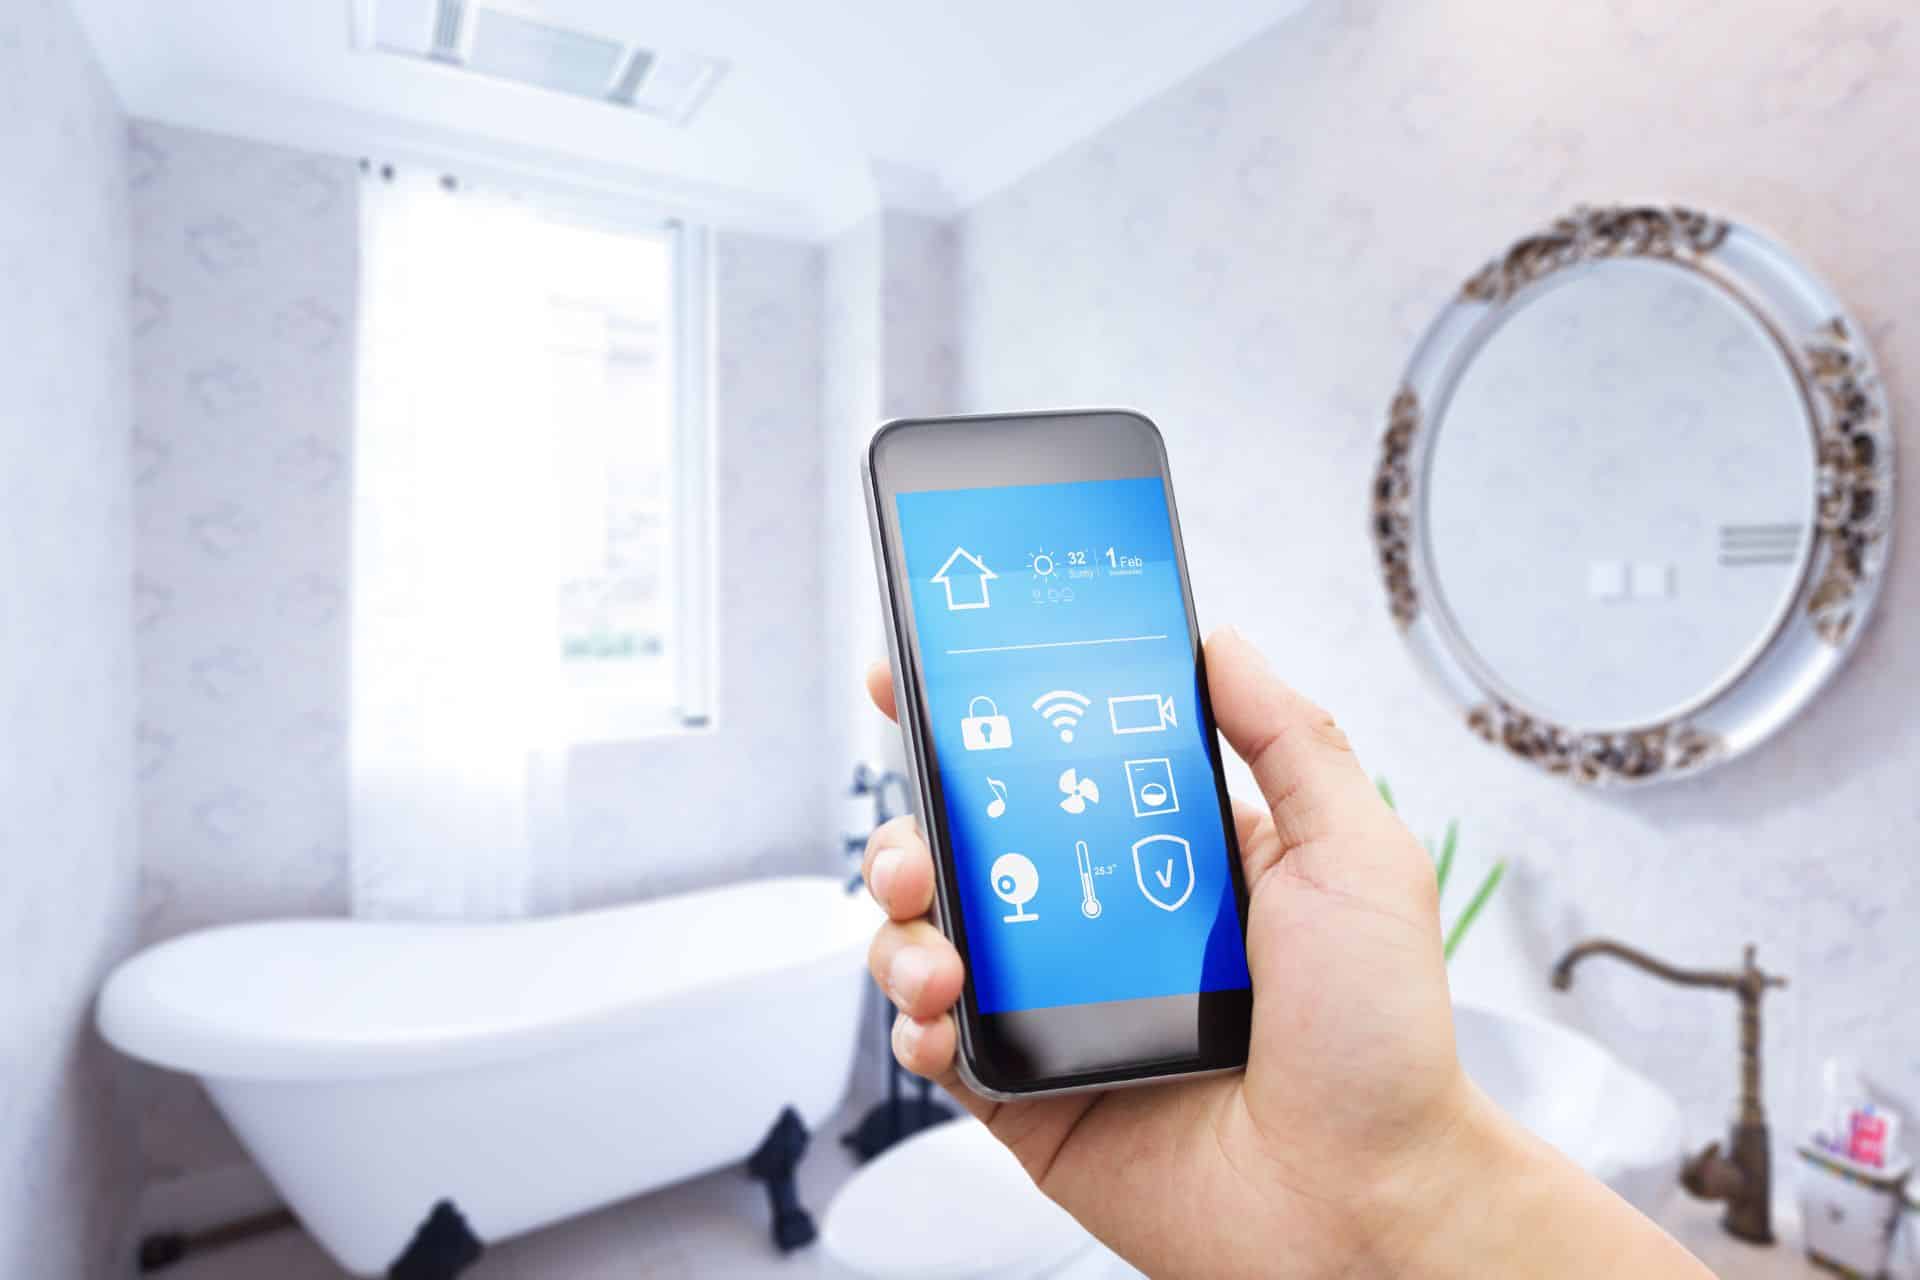 Learn how to easily create a budget smart bathroom with affordable, simple-to-use tech upgrades.